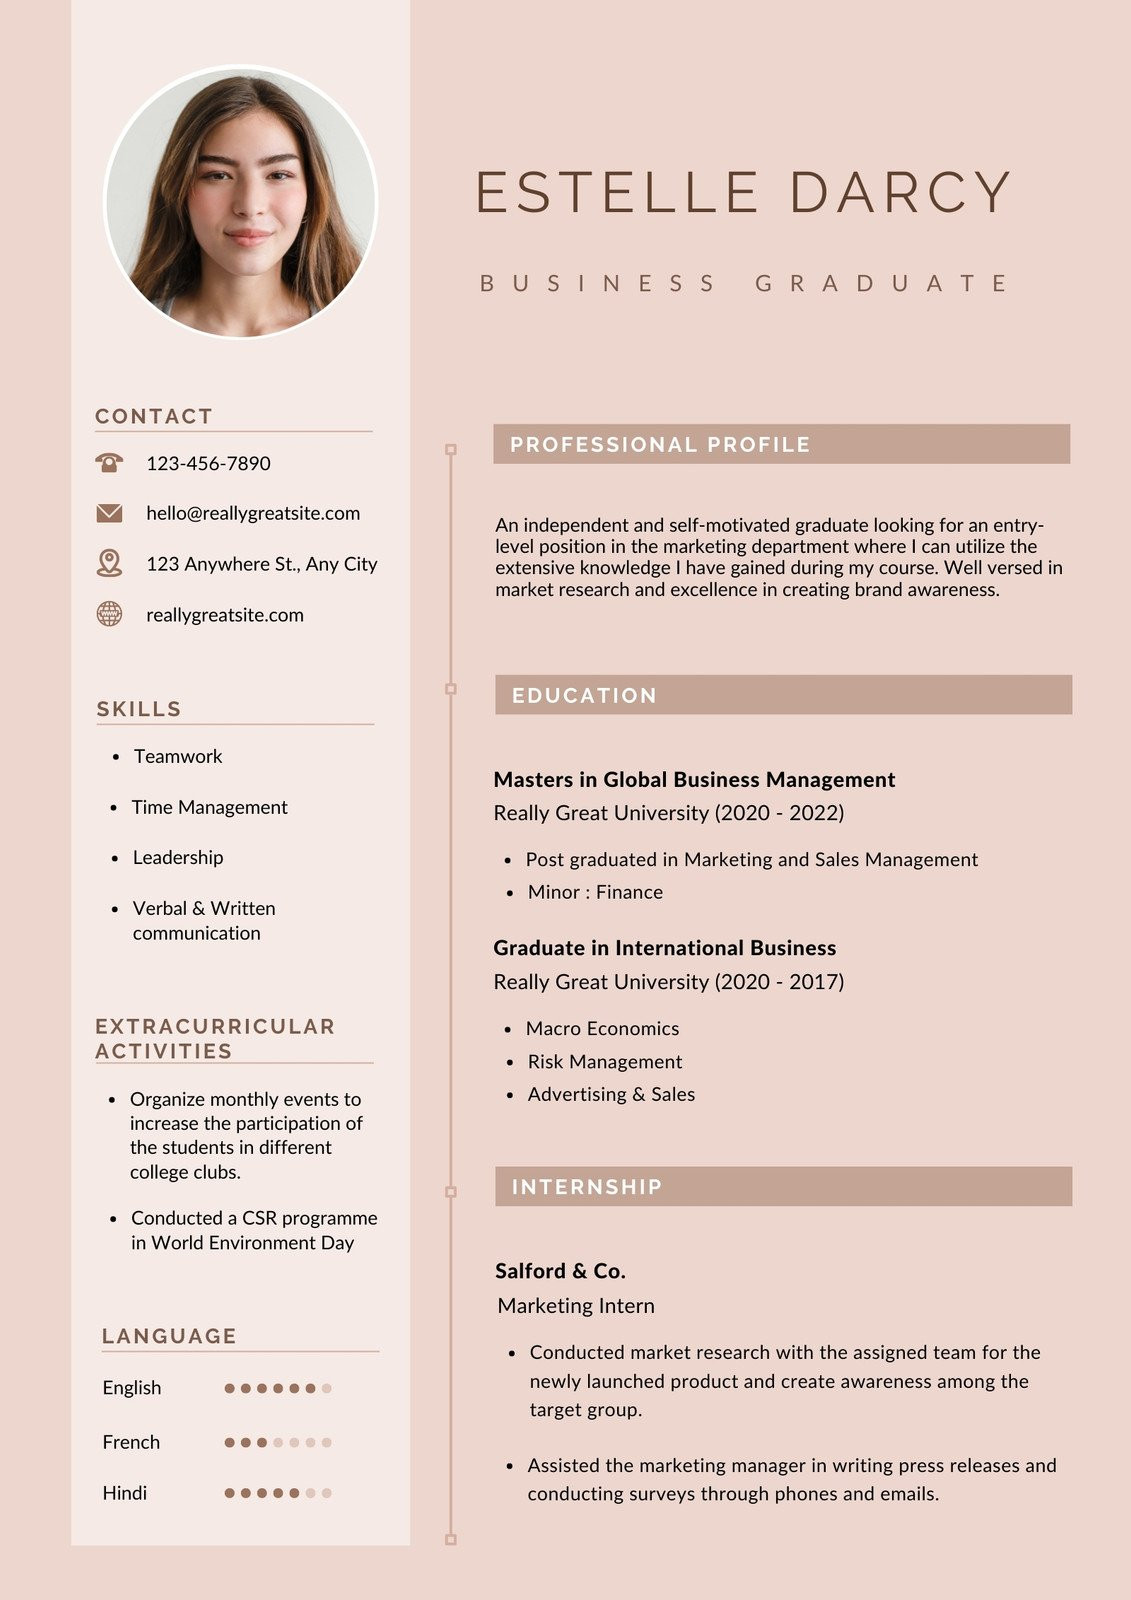 Released College Resume Samples for High School Senior Free Printable, Customizable College Resume Templates Canva